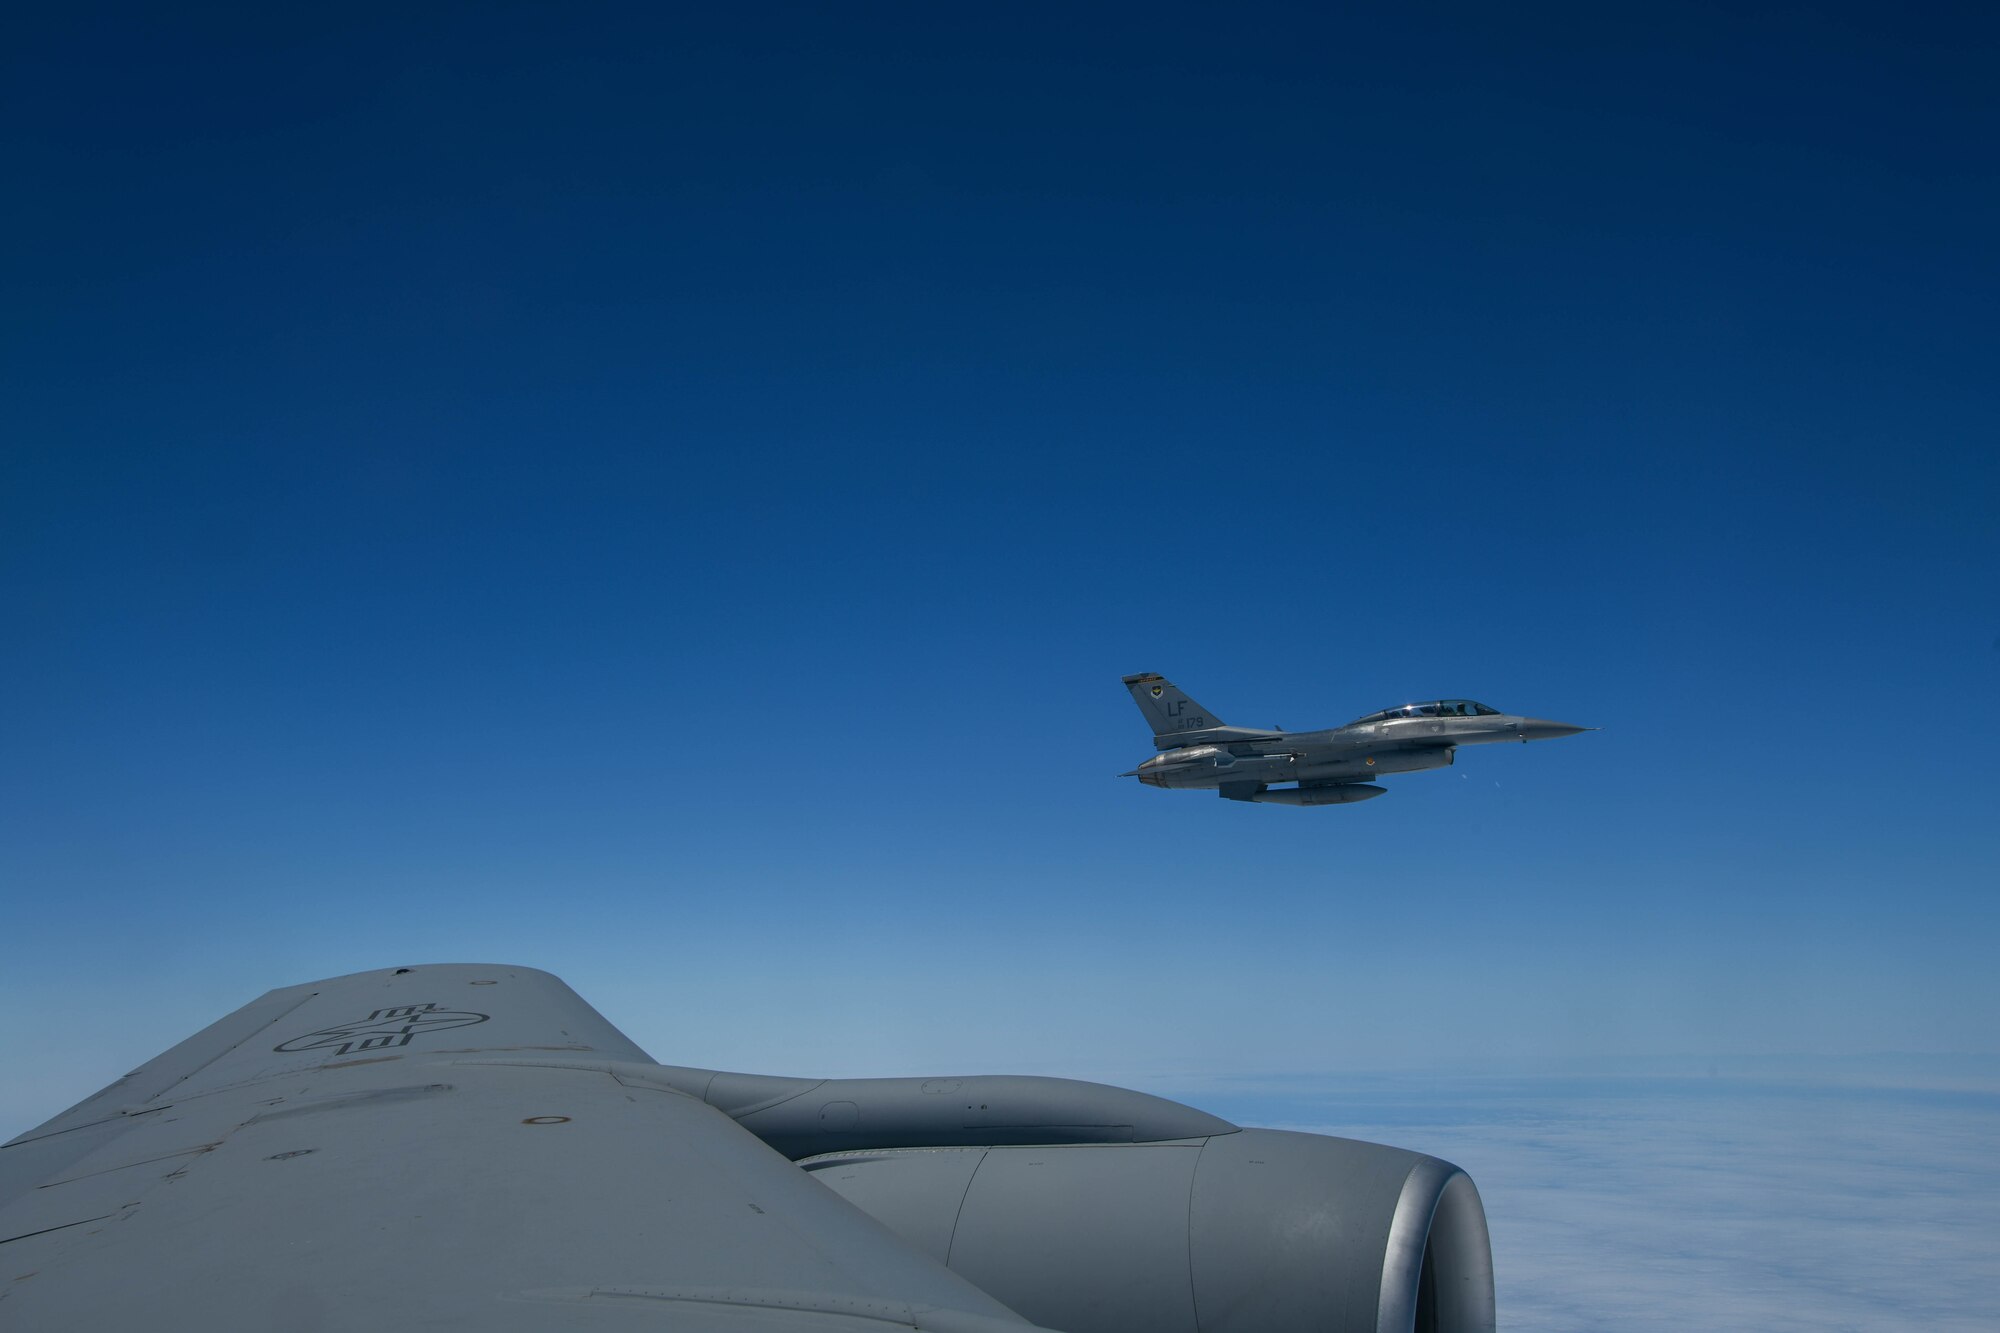 A U.S. Air Force F-16 Fighting Falcon from the 310th Fighter Squadron at Luke Air Force Base, Arizona, waits to be refueled by a KC-135 Stratotanker, July 11, 2022. The F-16s were conducting training with Marine Corps F/A-18 Hornets out of Marine Corps Air Station Miramar, California. (U.S. Air Force photo by Airman 1st Class Trenton Jancze)